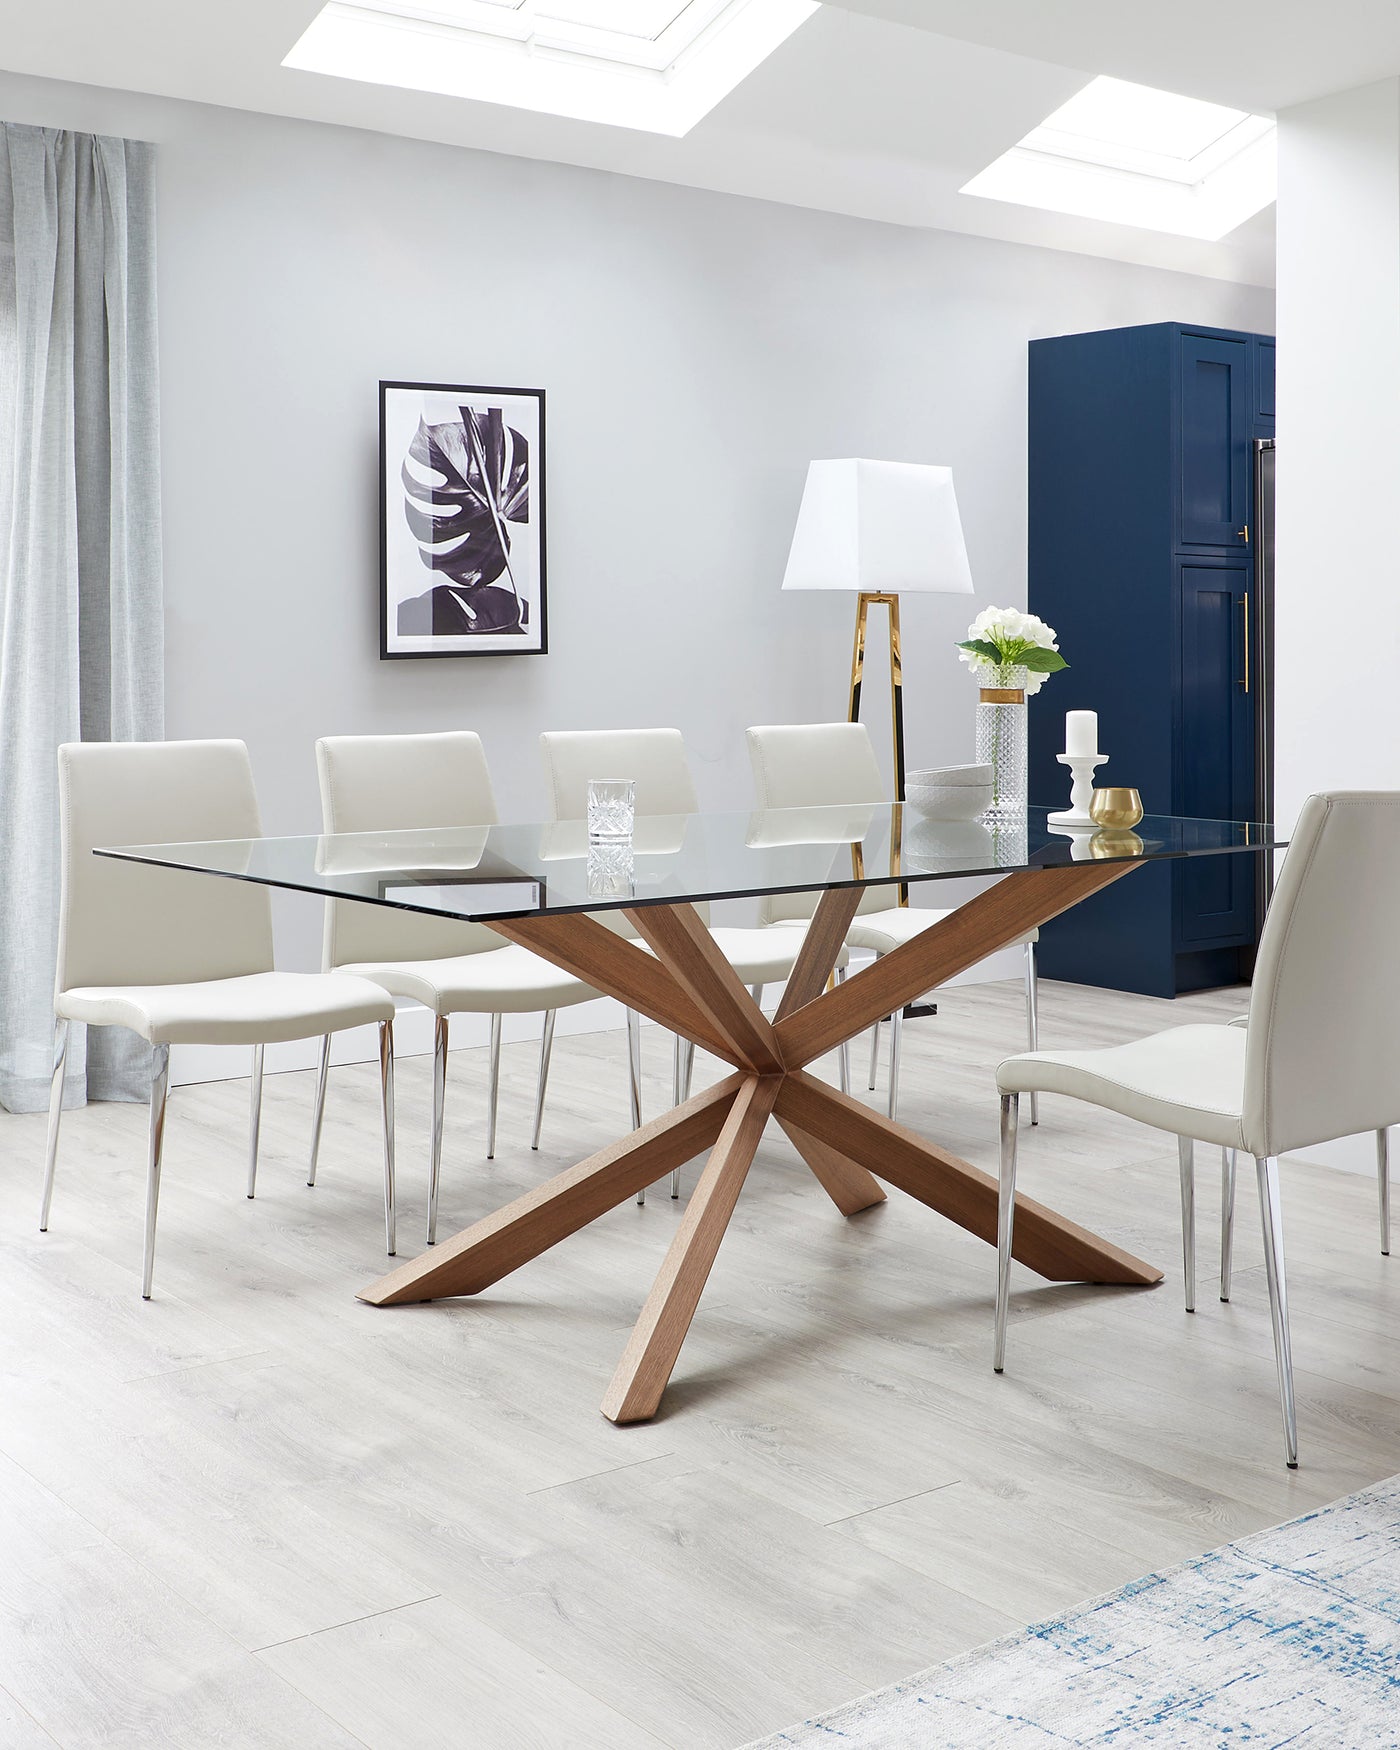 A modern dining room with a rectangular glass-topped table supported by a wooden starburst-style base. Surrounded by six sleek white leather chairs with slim metal legs. A stylish floor lamp with a brass stand and a white shade adds elegance to the corner of the room.